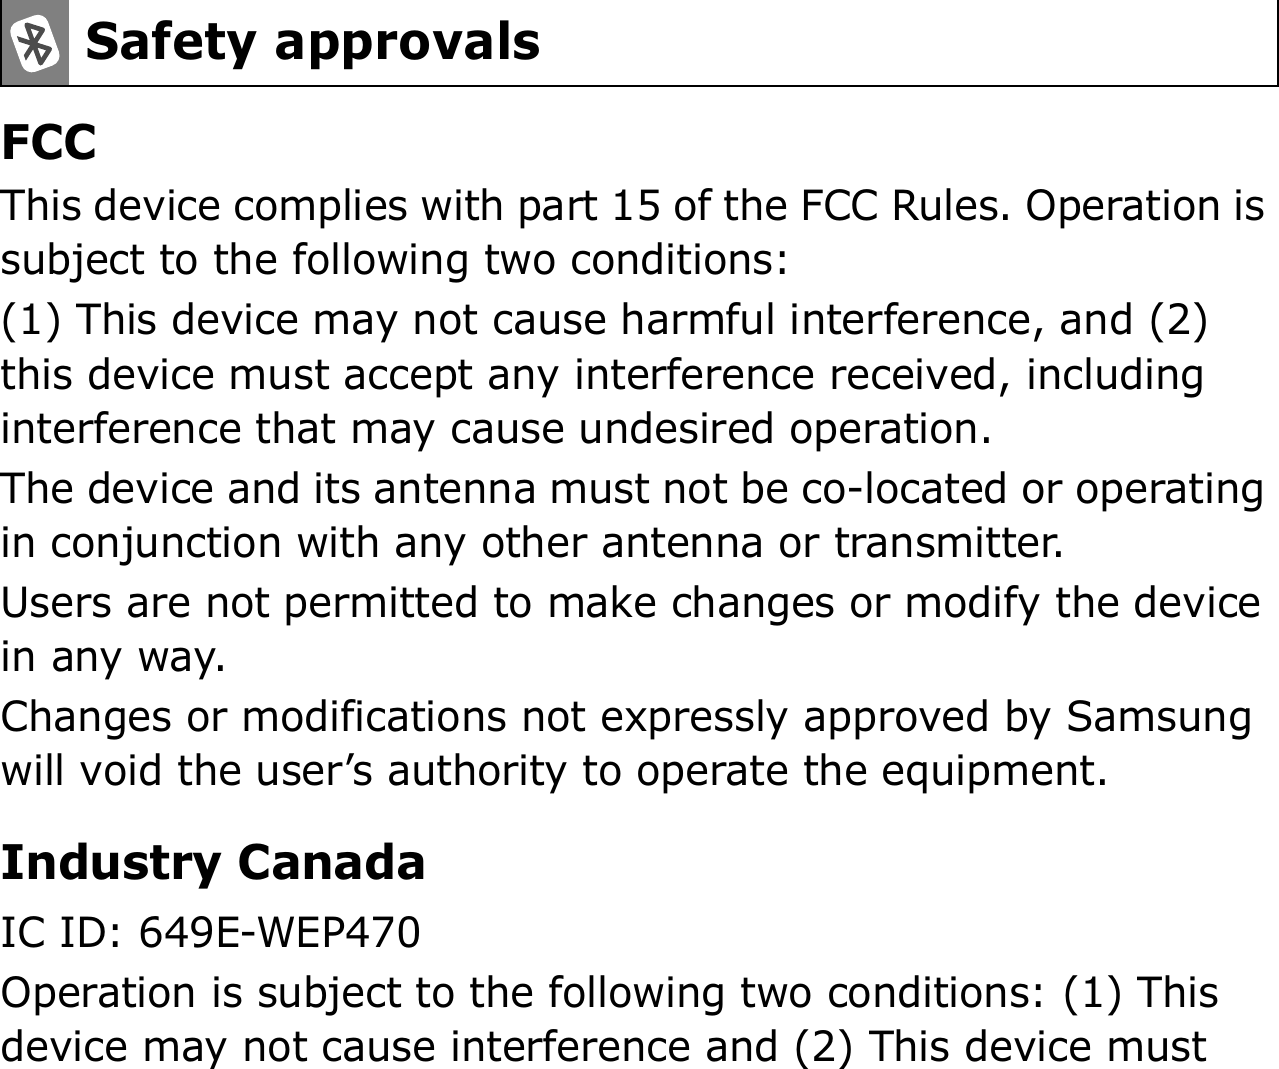 FCCThis device complies with part 15 of the FCC Rules. Operation is subject to the following two conditions:(1) This device may not cause harmful interference, and (2) this device must accept any interference received, including interference that may cause undesired operation.The device and its antenna must not be co-located or operating in conjunction with any other antenna or transmitter.Users are not permitted to make changes or modify the device in any way. Changes or modifications not expressly approved by Samsung will void the user’s authority to operate the equipment.Industry CanadaIC ID: 649E-WEP470Operation is subject to the following two conditions: (1) This device may not cause interference and (2) This device must Safety approvals